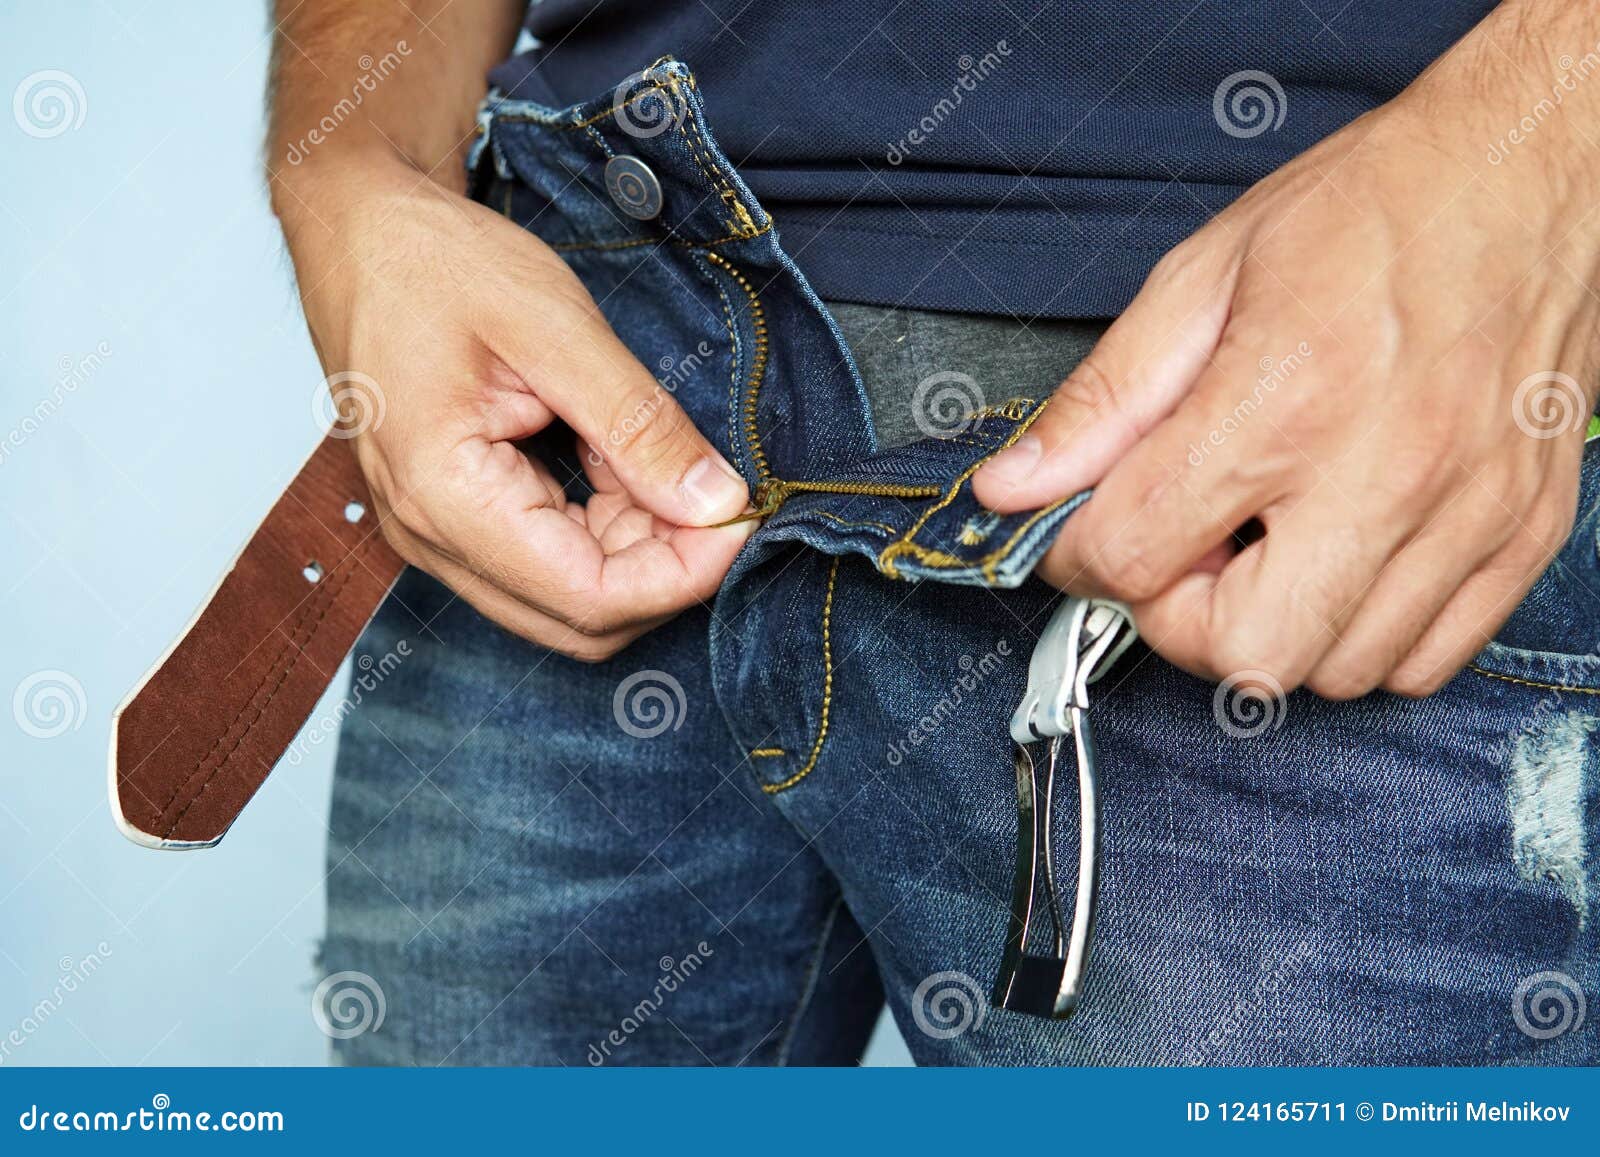 close up shot of man in jeans with open zipper